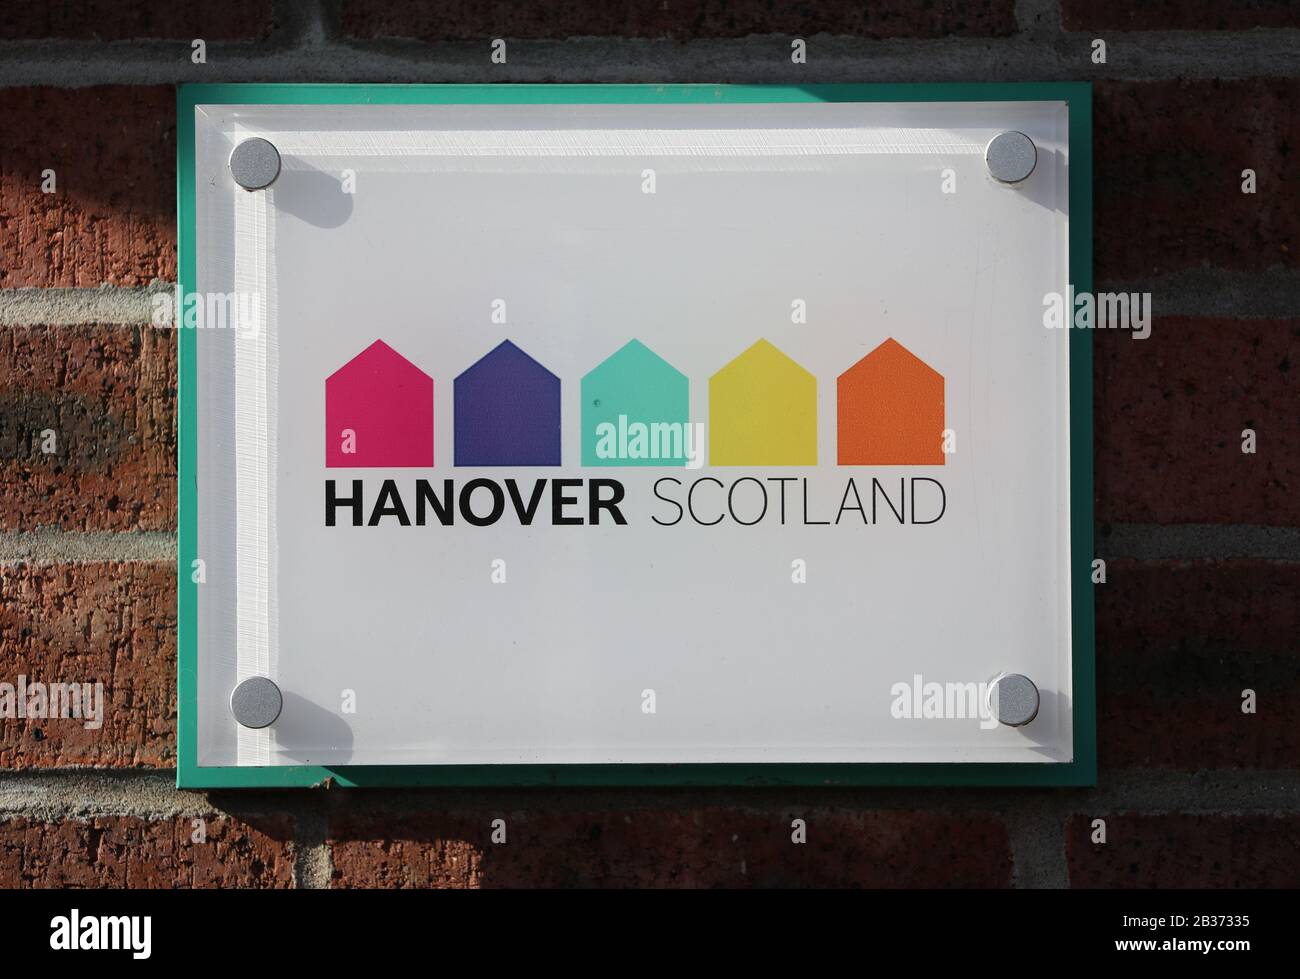 A Hanover Scotland sign is visible at the entrance to a Hanover Scotland sheltered housing complex in Kilmarnock, East Ayrshire. It was confirmed a resident at one of their developments in Ayrshire had recently returned from south-east Asia and reported feeling unwell. Stock Photo